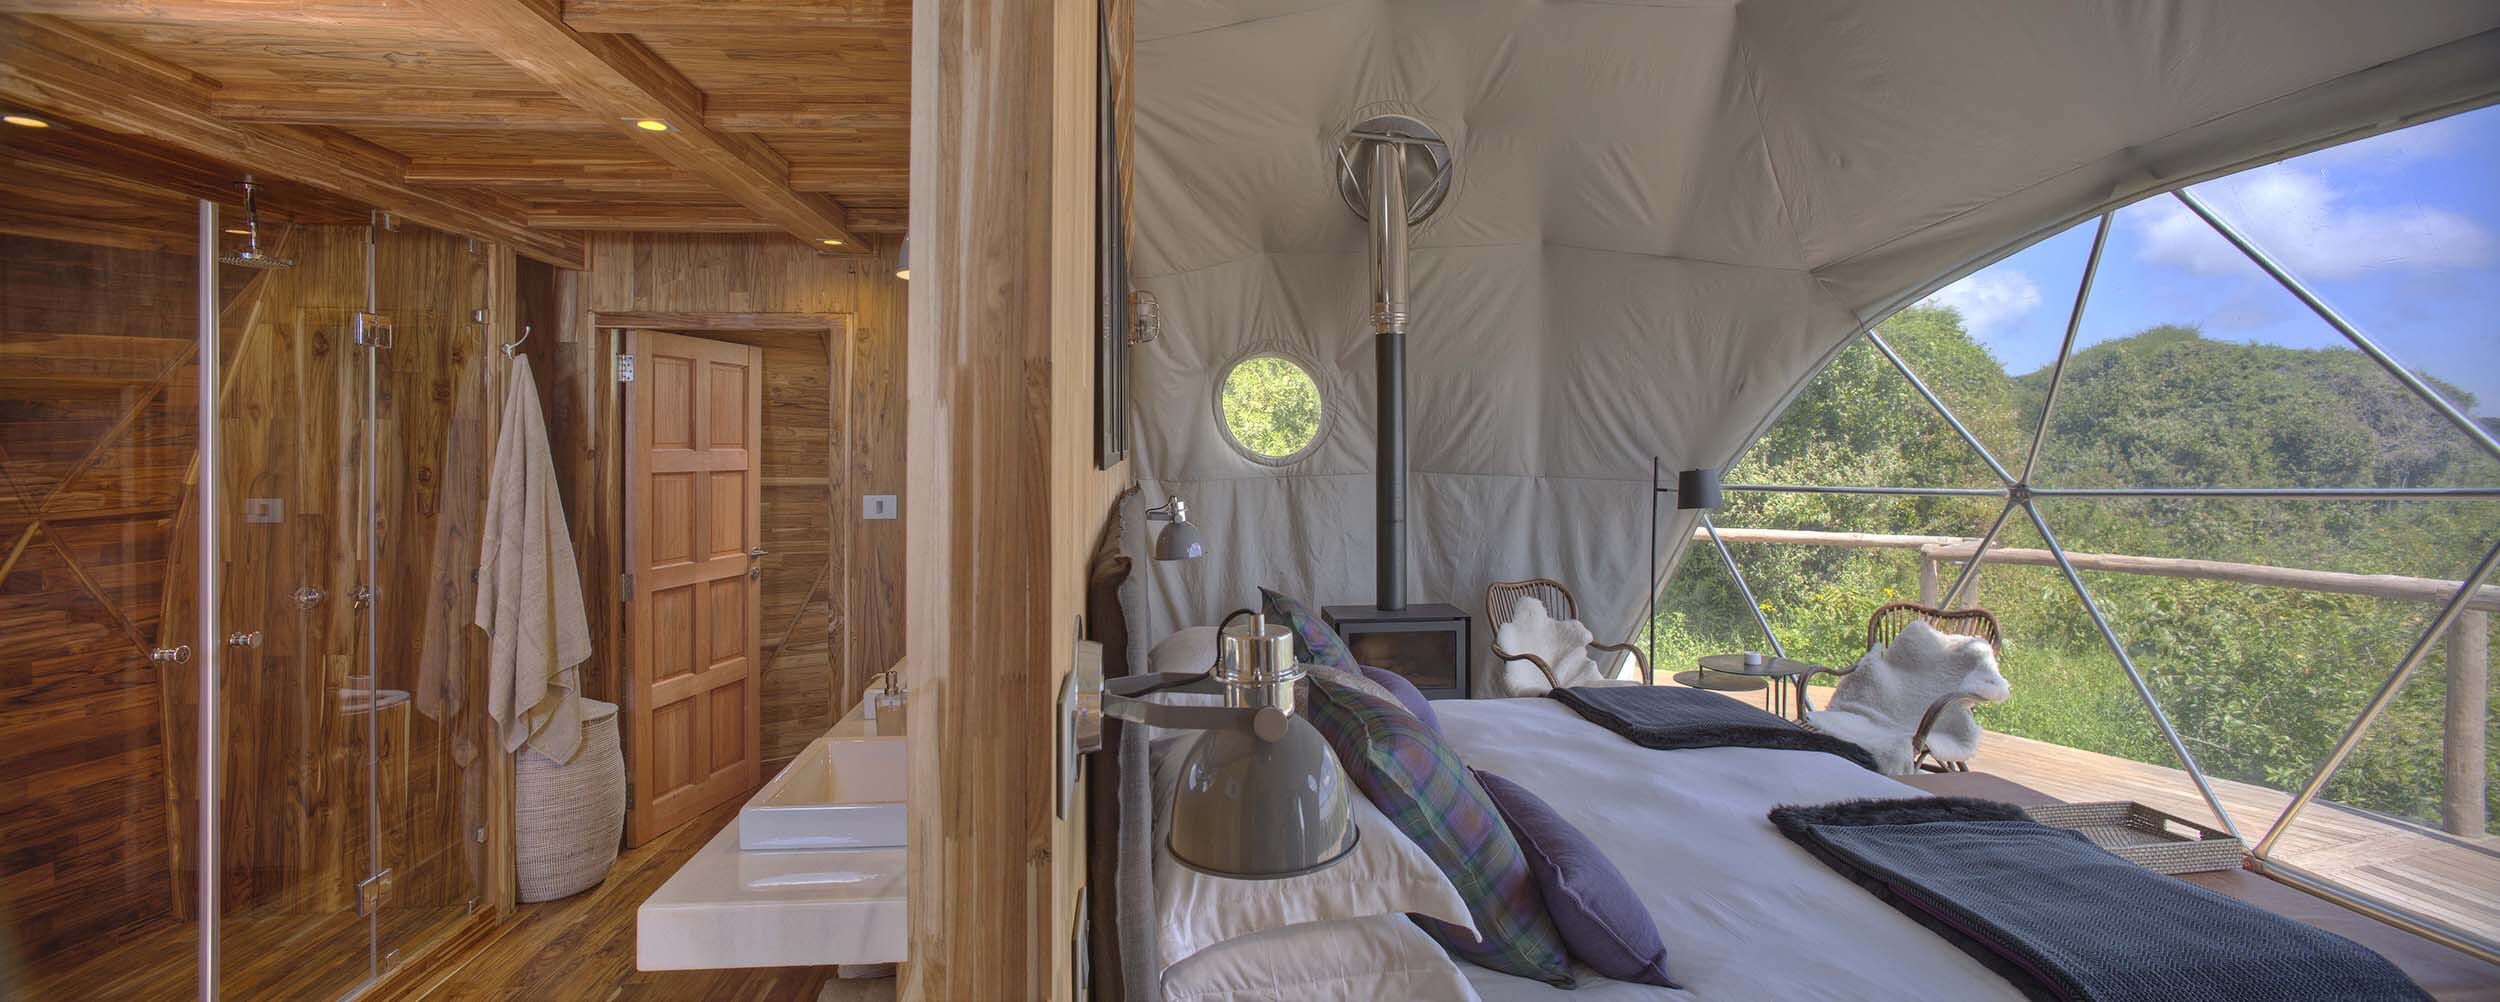 Guest-dome-bedroom-and-bathroom-view